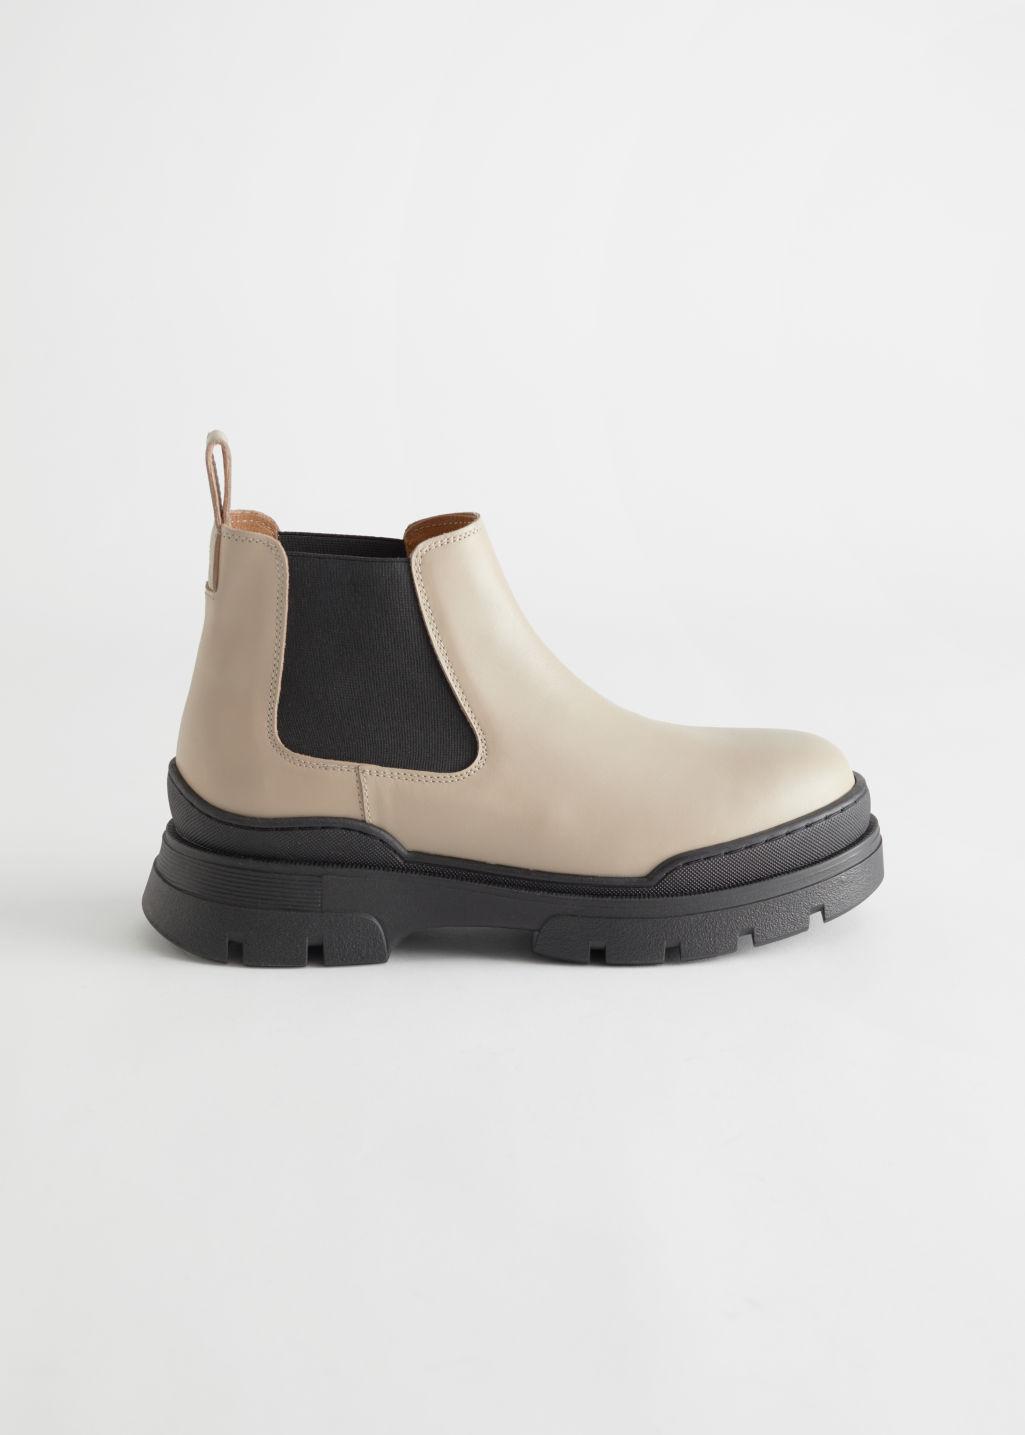 & Other Stories Chunky Leather Chelsea Boots in Beige (Natural) | Lyst